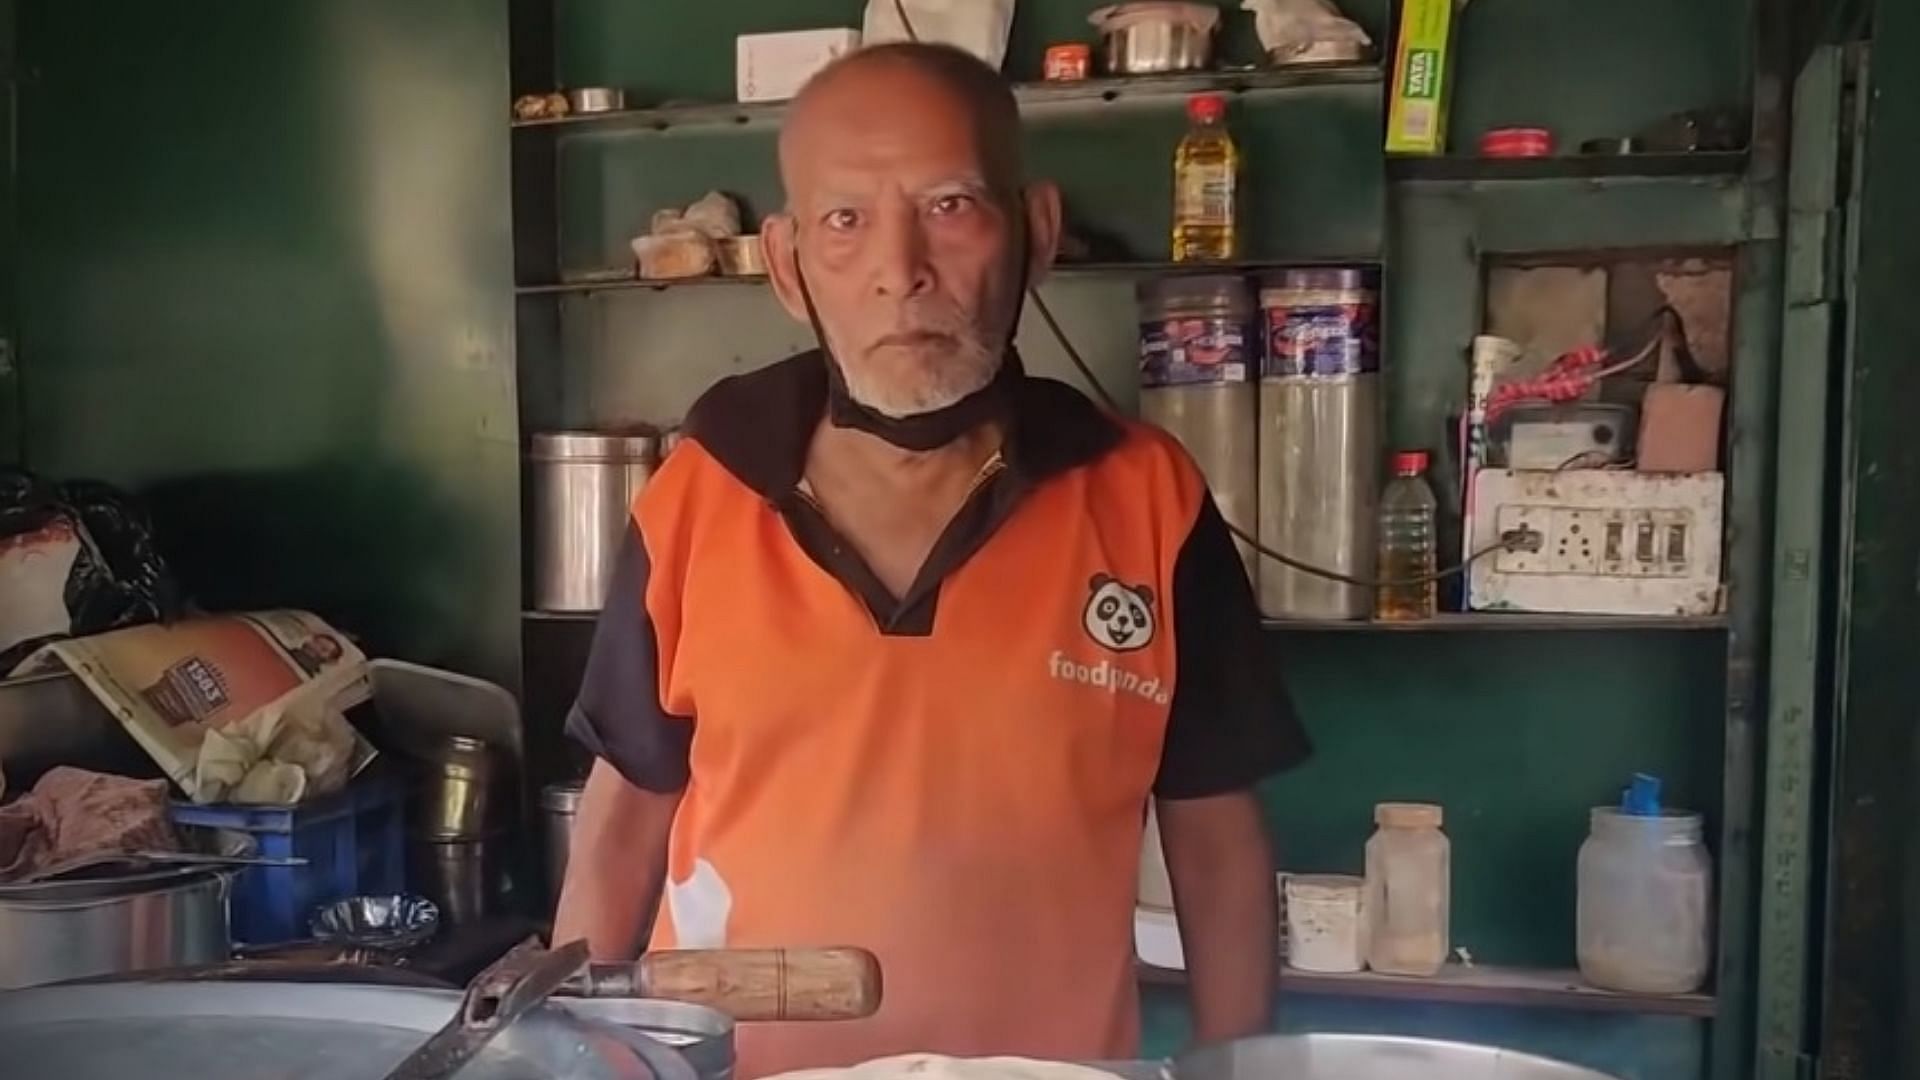 Kanta Prasad, who runs the dhaba, has alleged that Wasan misappropriated the funds that was raised to help him.